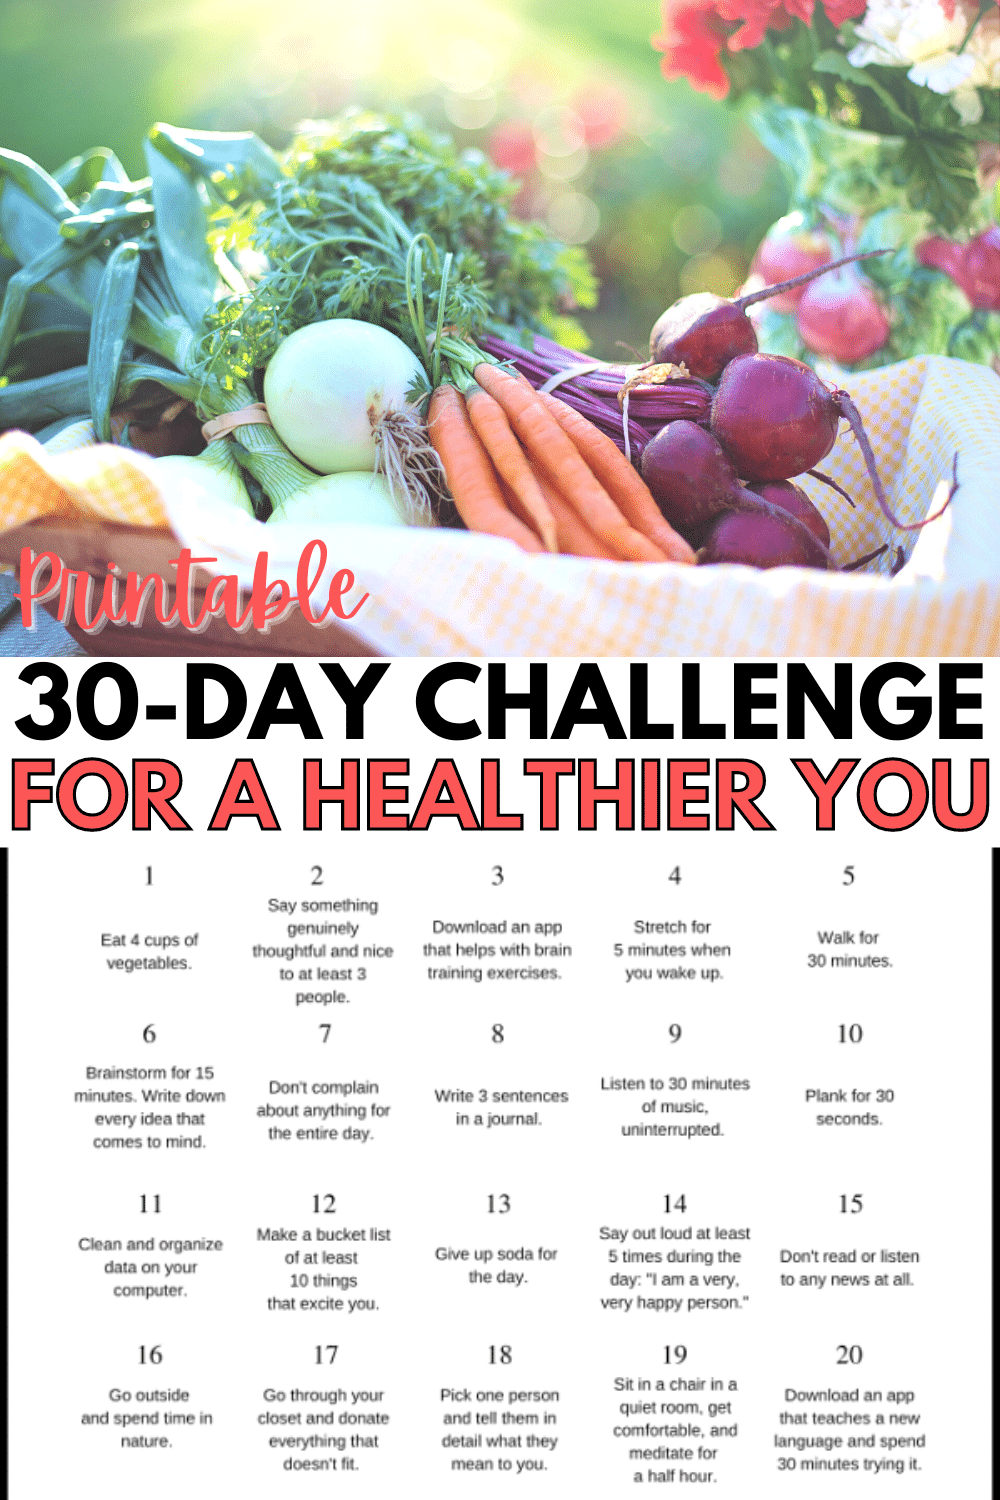 This 30-day challenge is perfect for setting up healthy habits for all aspects of your health. I love that the article includes resources to help you focus on specific health areas too. #health #challenge #healthyhabits via @wondermomwannab